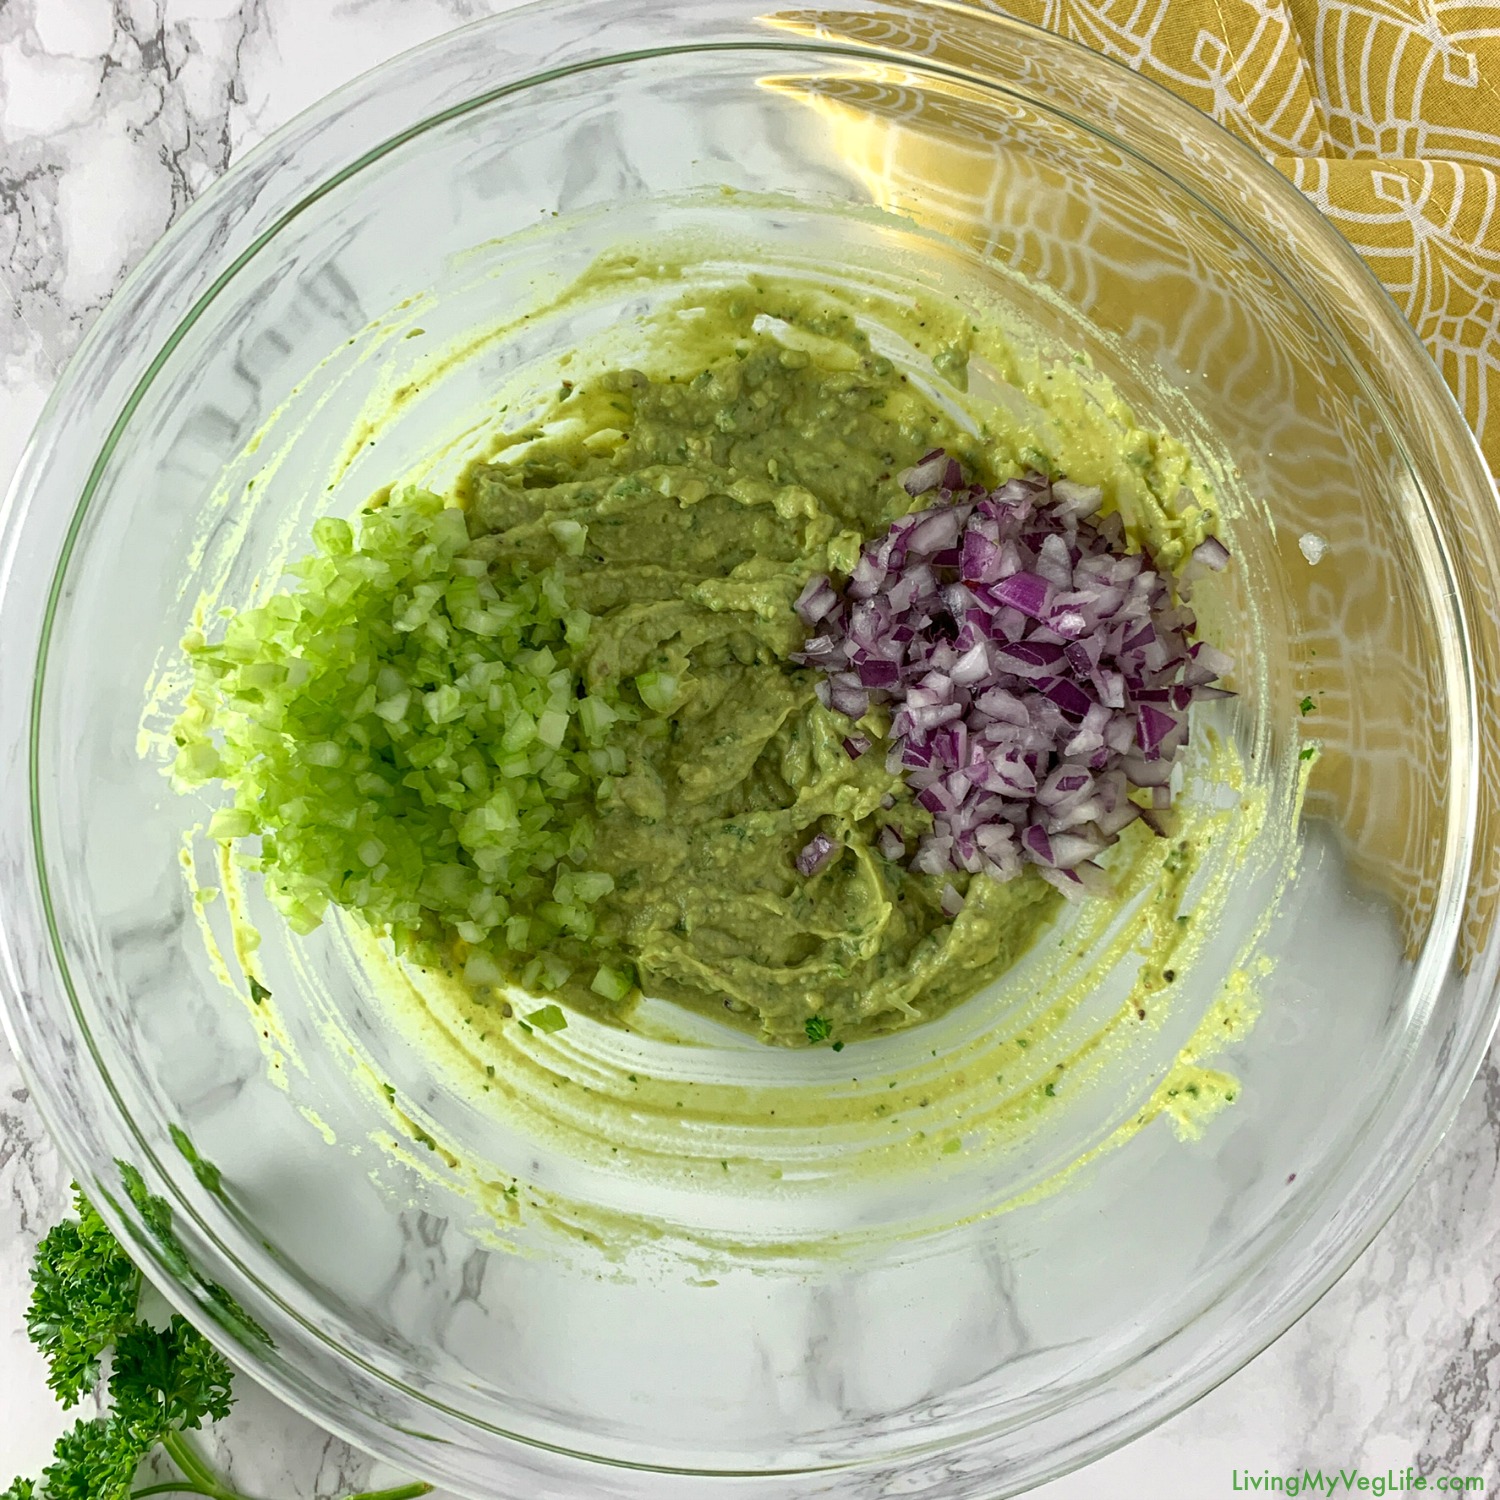 add the celery and red onions to the avocado mayo replacement